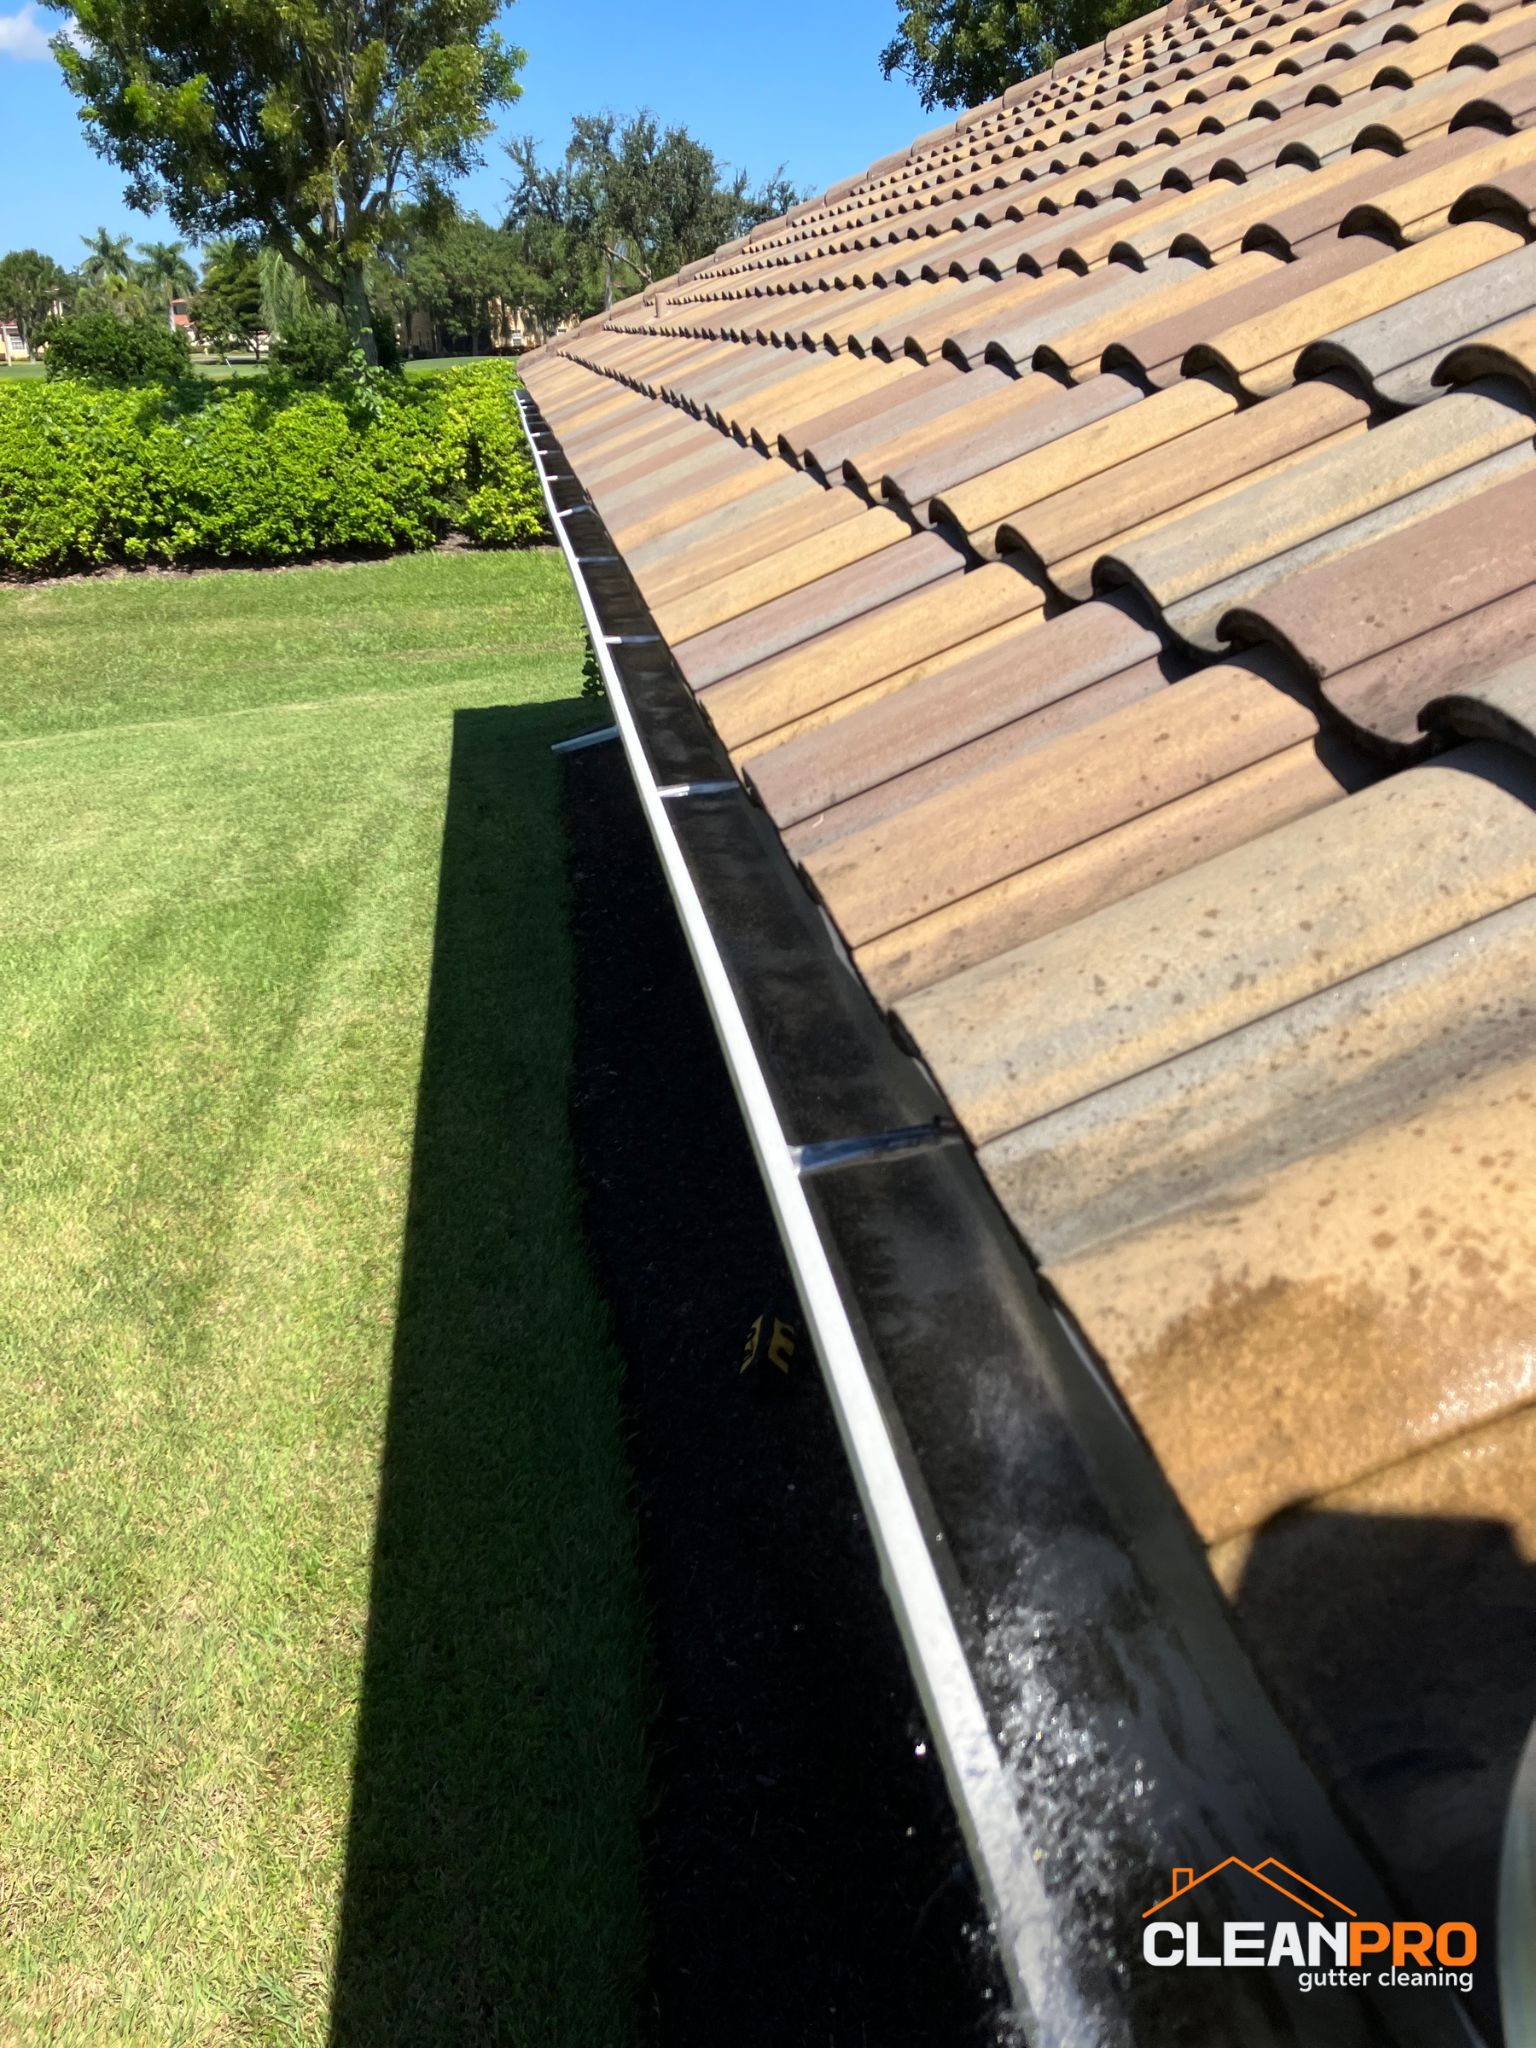 Residential Gutter Cleaning in Orlando FL